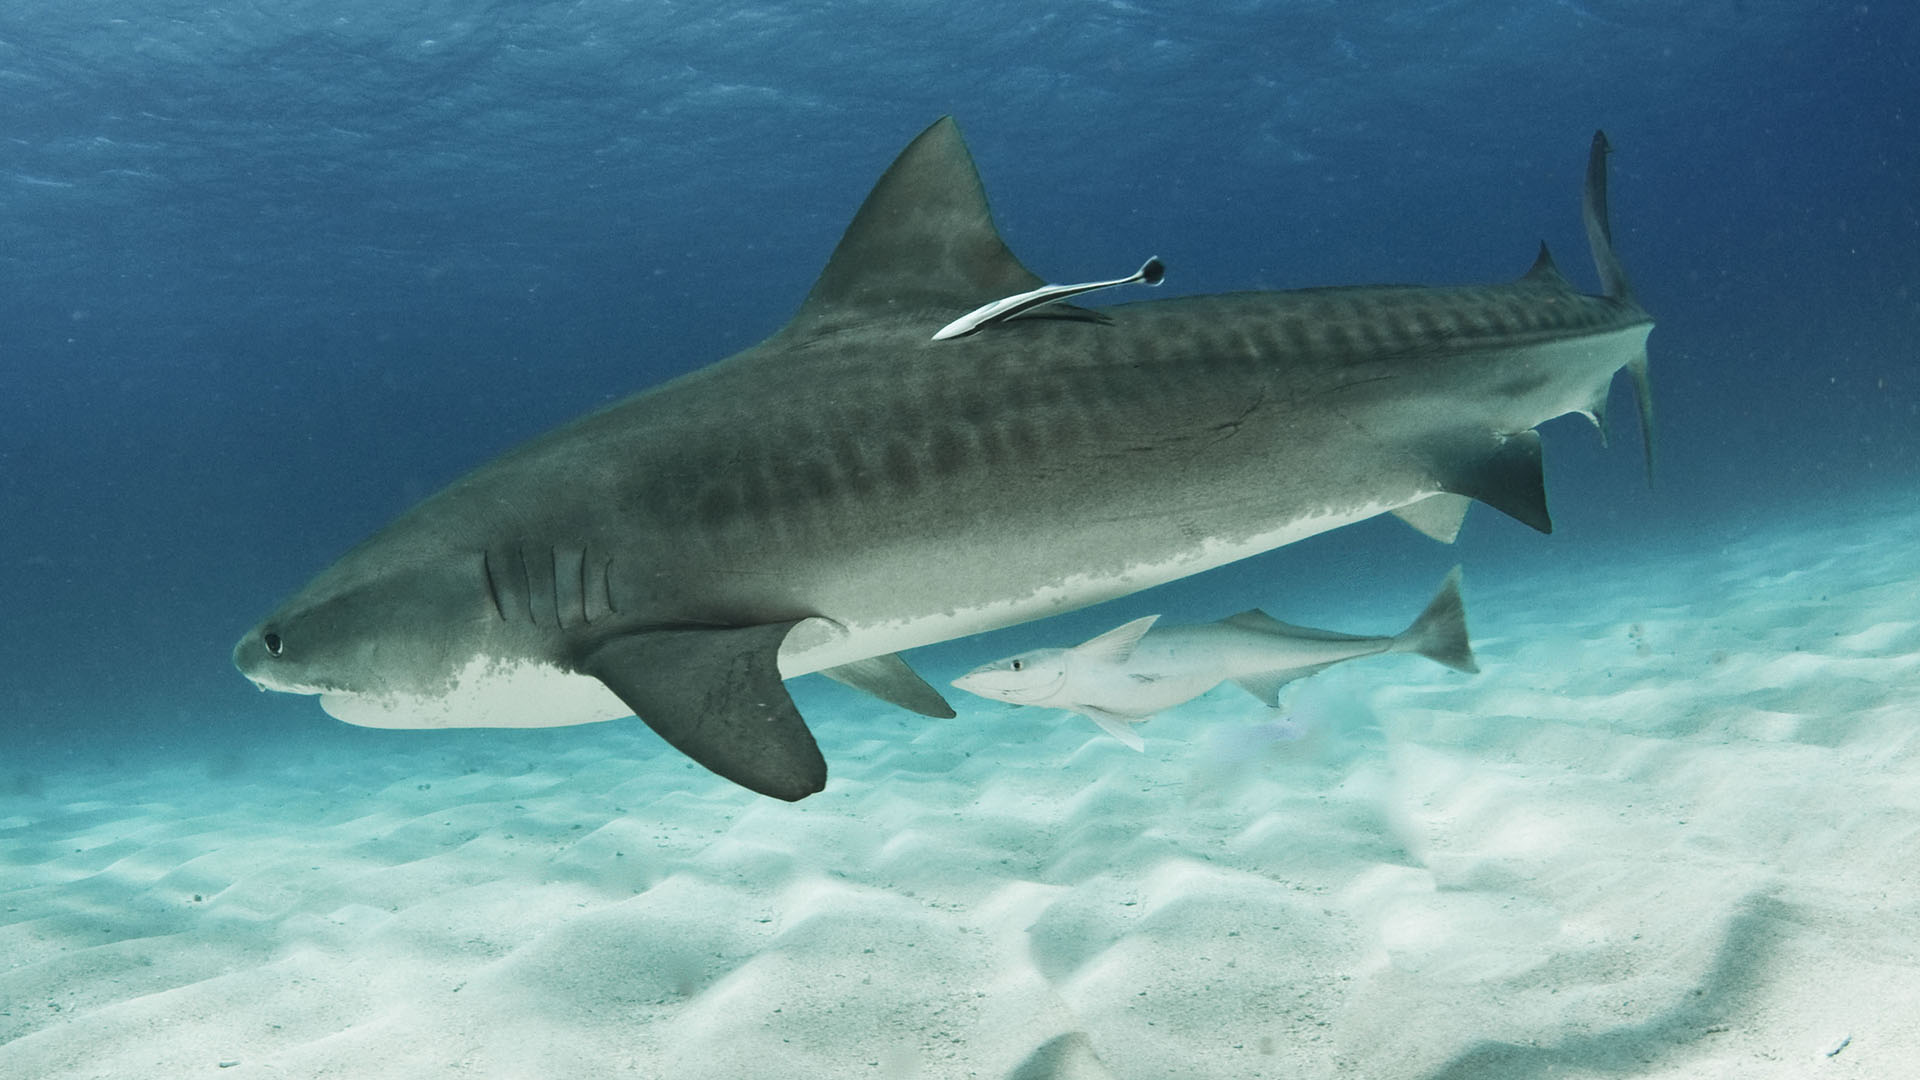 Creative commons photo of tiger shark. "File:Tigershark5.jpg" by Albert kok is licensed under CC BY-SA 3.0